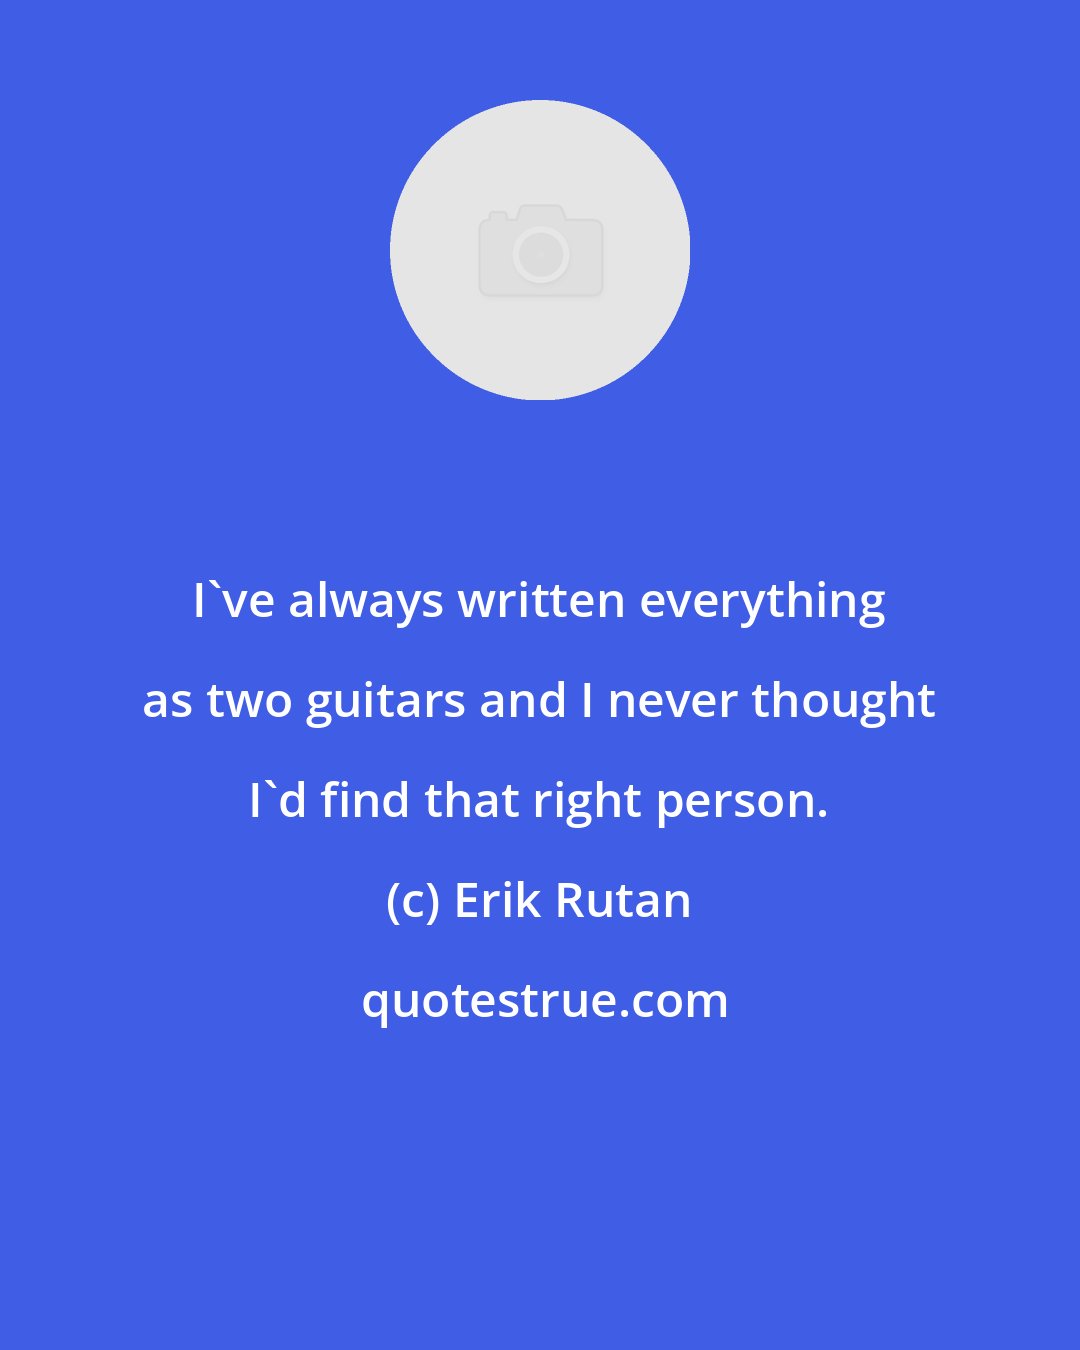 Erik Rutan: I've always written everything as two guitars and I never thought I'd find that right person.